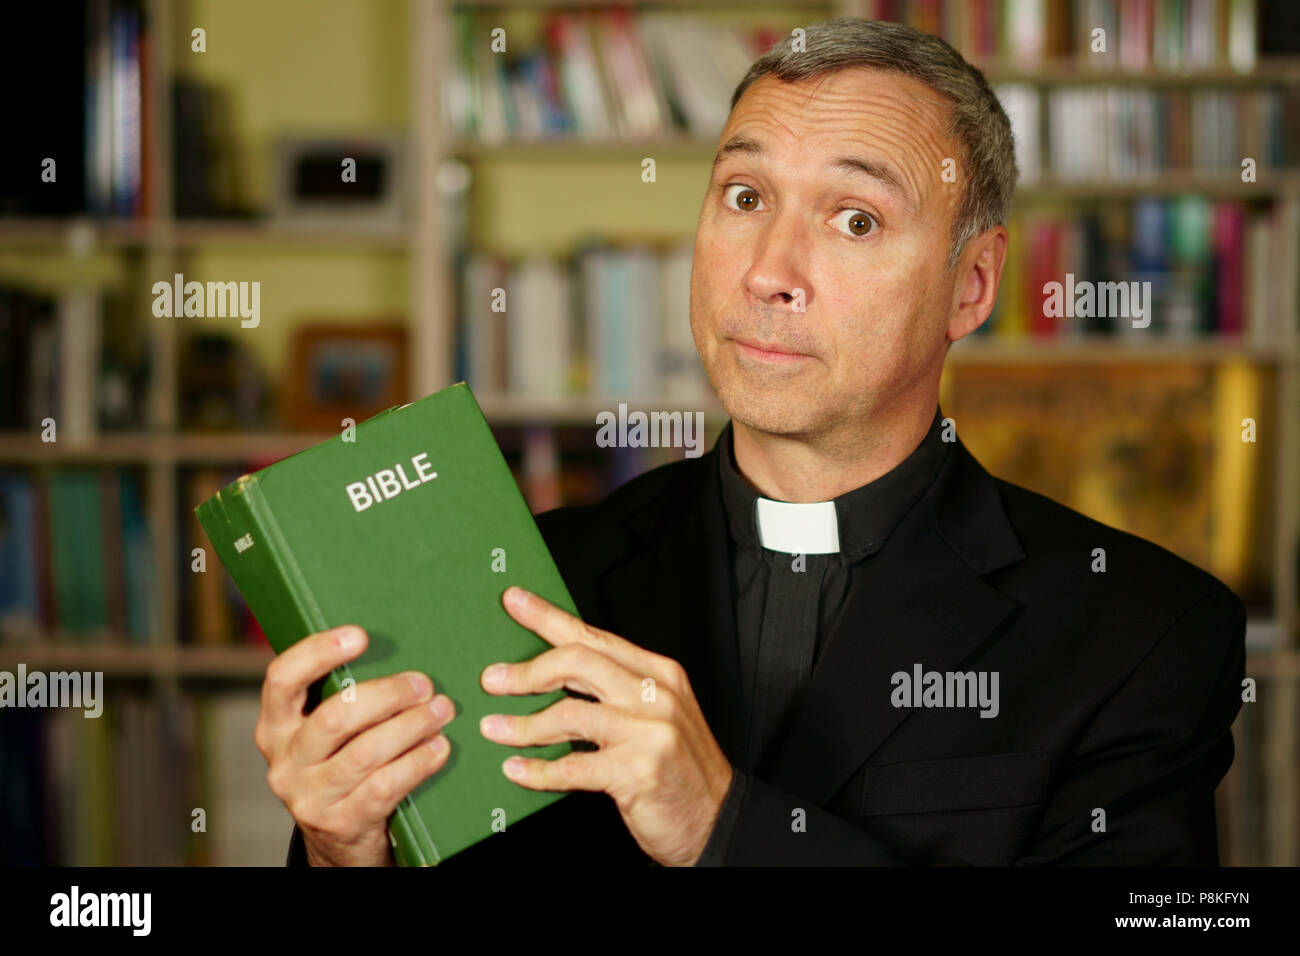 A good looking serious catholic priest is studying, reading the Bible, into his library. He looks at us with disapproval. Stock Photo